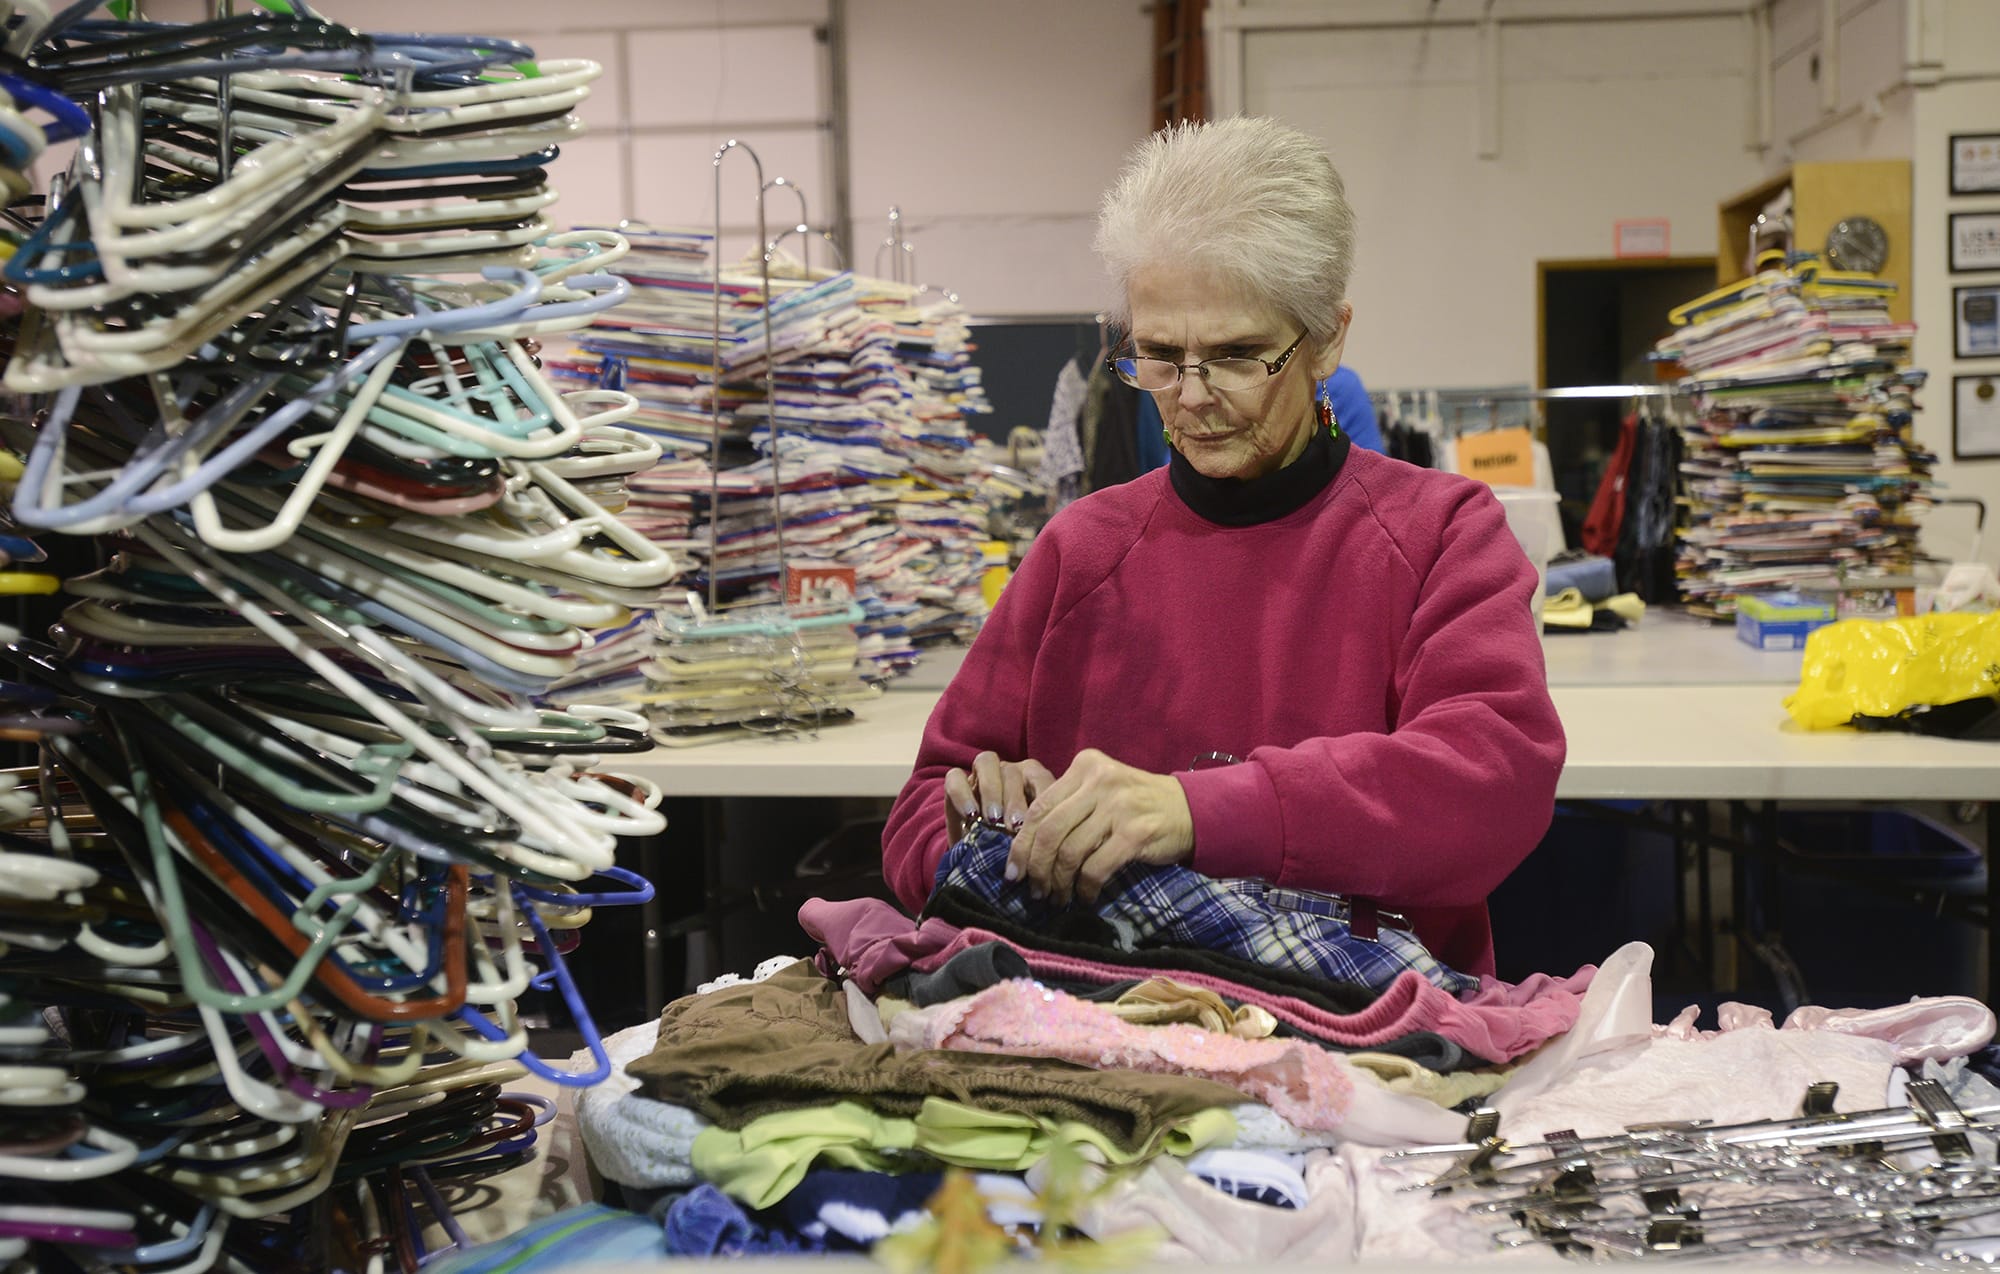 Volunteer Ann Blackwell sorts through clothing donations at the Giving Closet. The nonprofit provides free clothing, shoes, bedding, books and non-perishable food items to low-income and homeless Vancouver families.